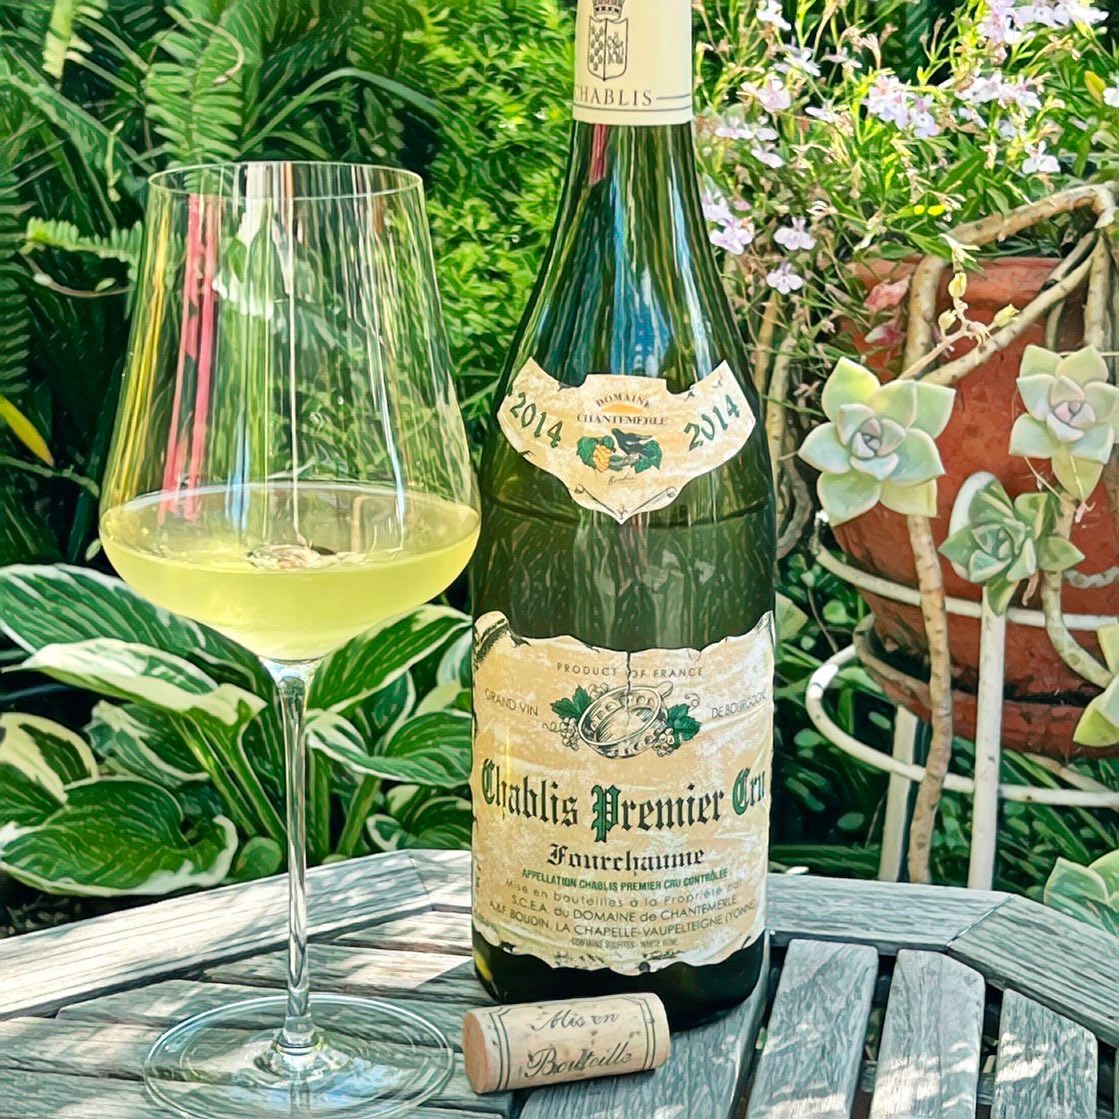 Some things that were already pretty great get even better with age. This is one of them. 
.
.
.
#chablis #chabliswine #chardonnay #chablispremiercru #chablis1ercru #chablislover #chardonnaylover #fourchaume #bourgogne #winegeek #wino #winetime #winetraveler #whitewine #goodwine #wineoclock #singlevineyardwine #winenotes #instawine #levindechablis #lechardonnay #thelastbottle